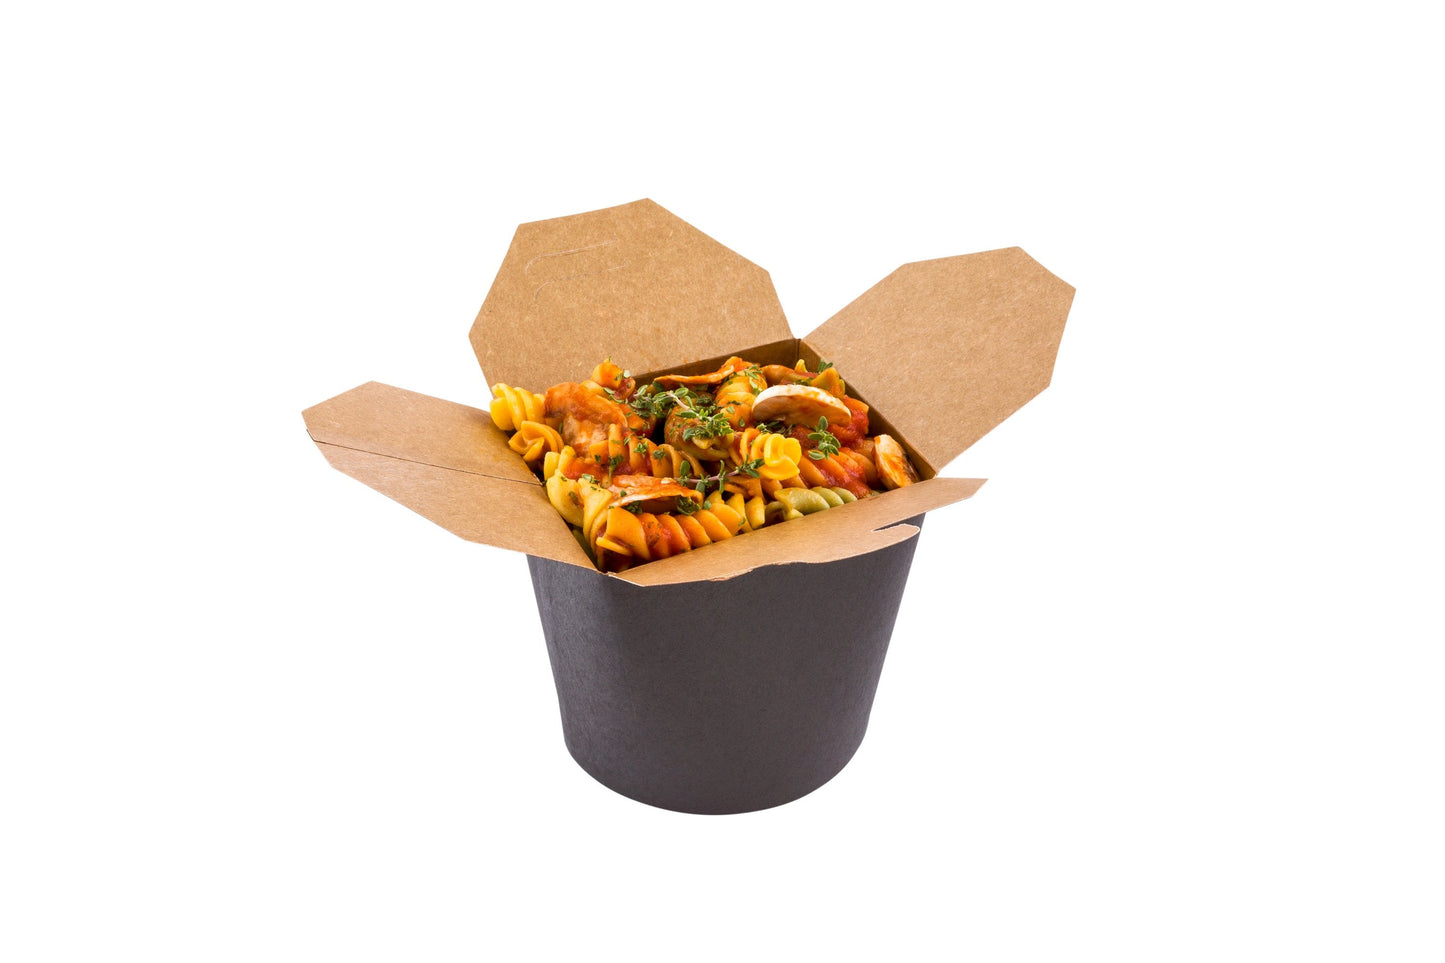 Bio Tek 26 oz Round Black Paper Round Noodle Take Out Container - 4" x 3 1/2" x 3 3/4" - 200 count box